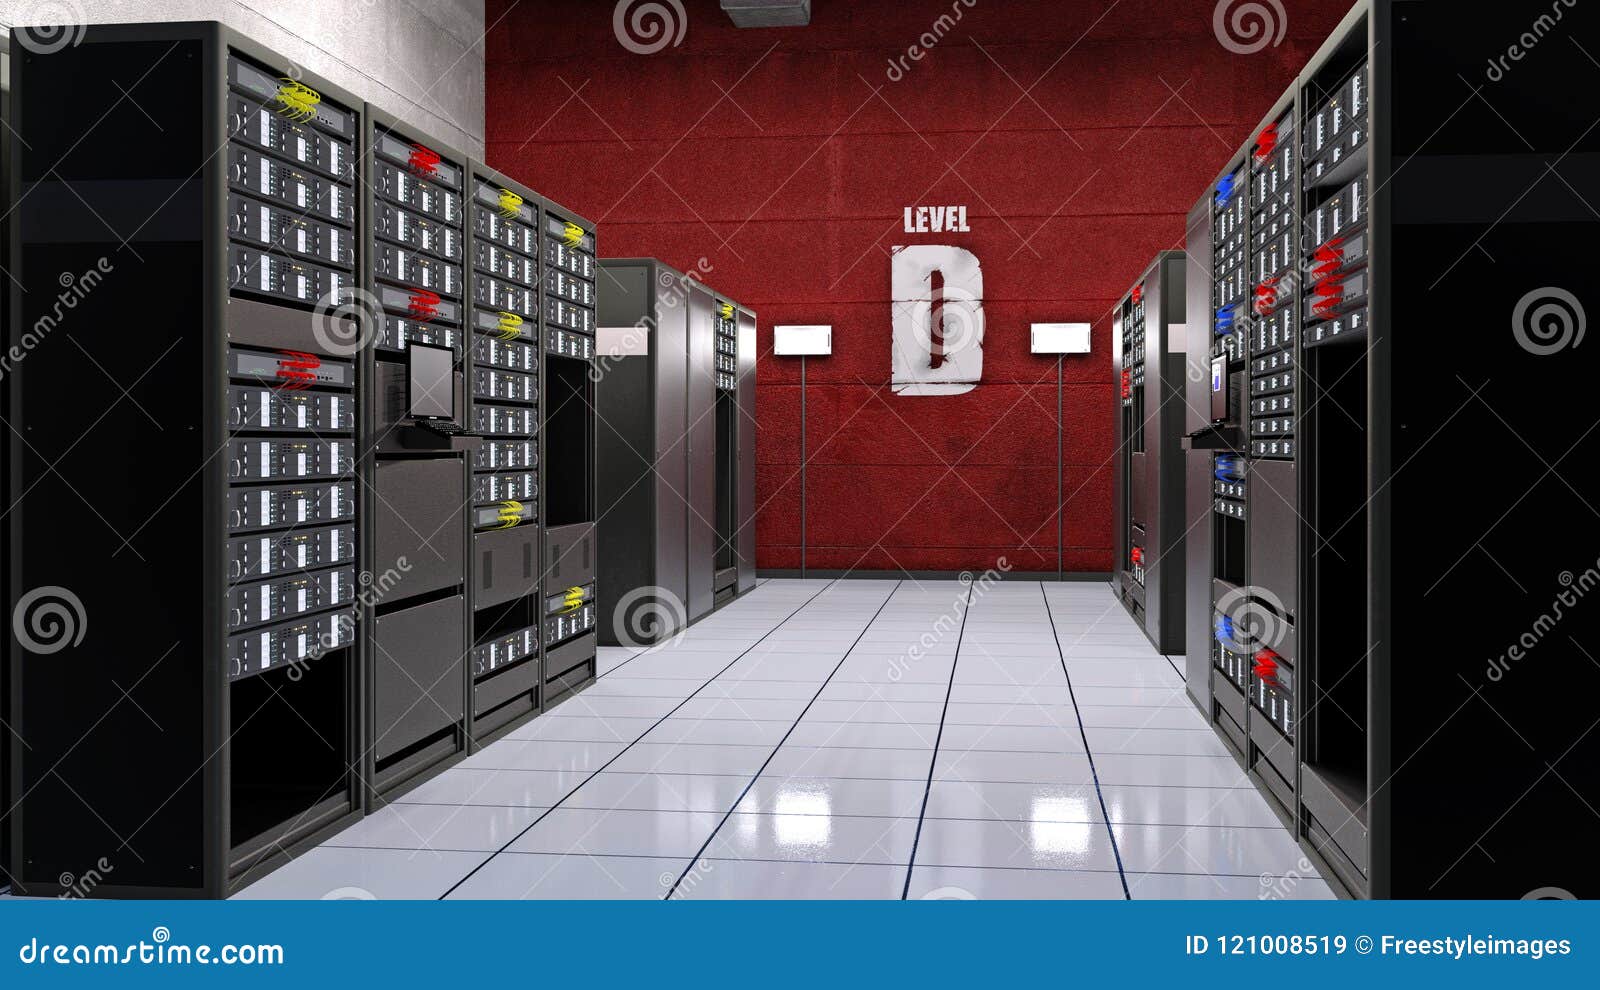 server room, data center with computer servers in racks, computer facility data storage, 3d render